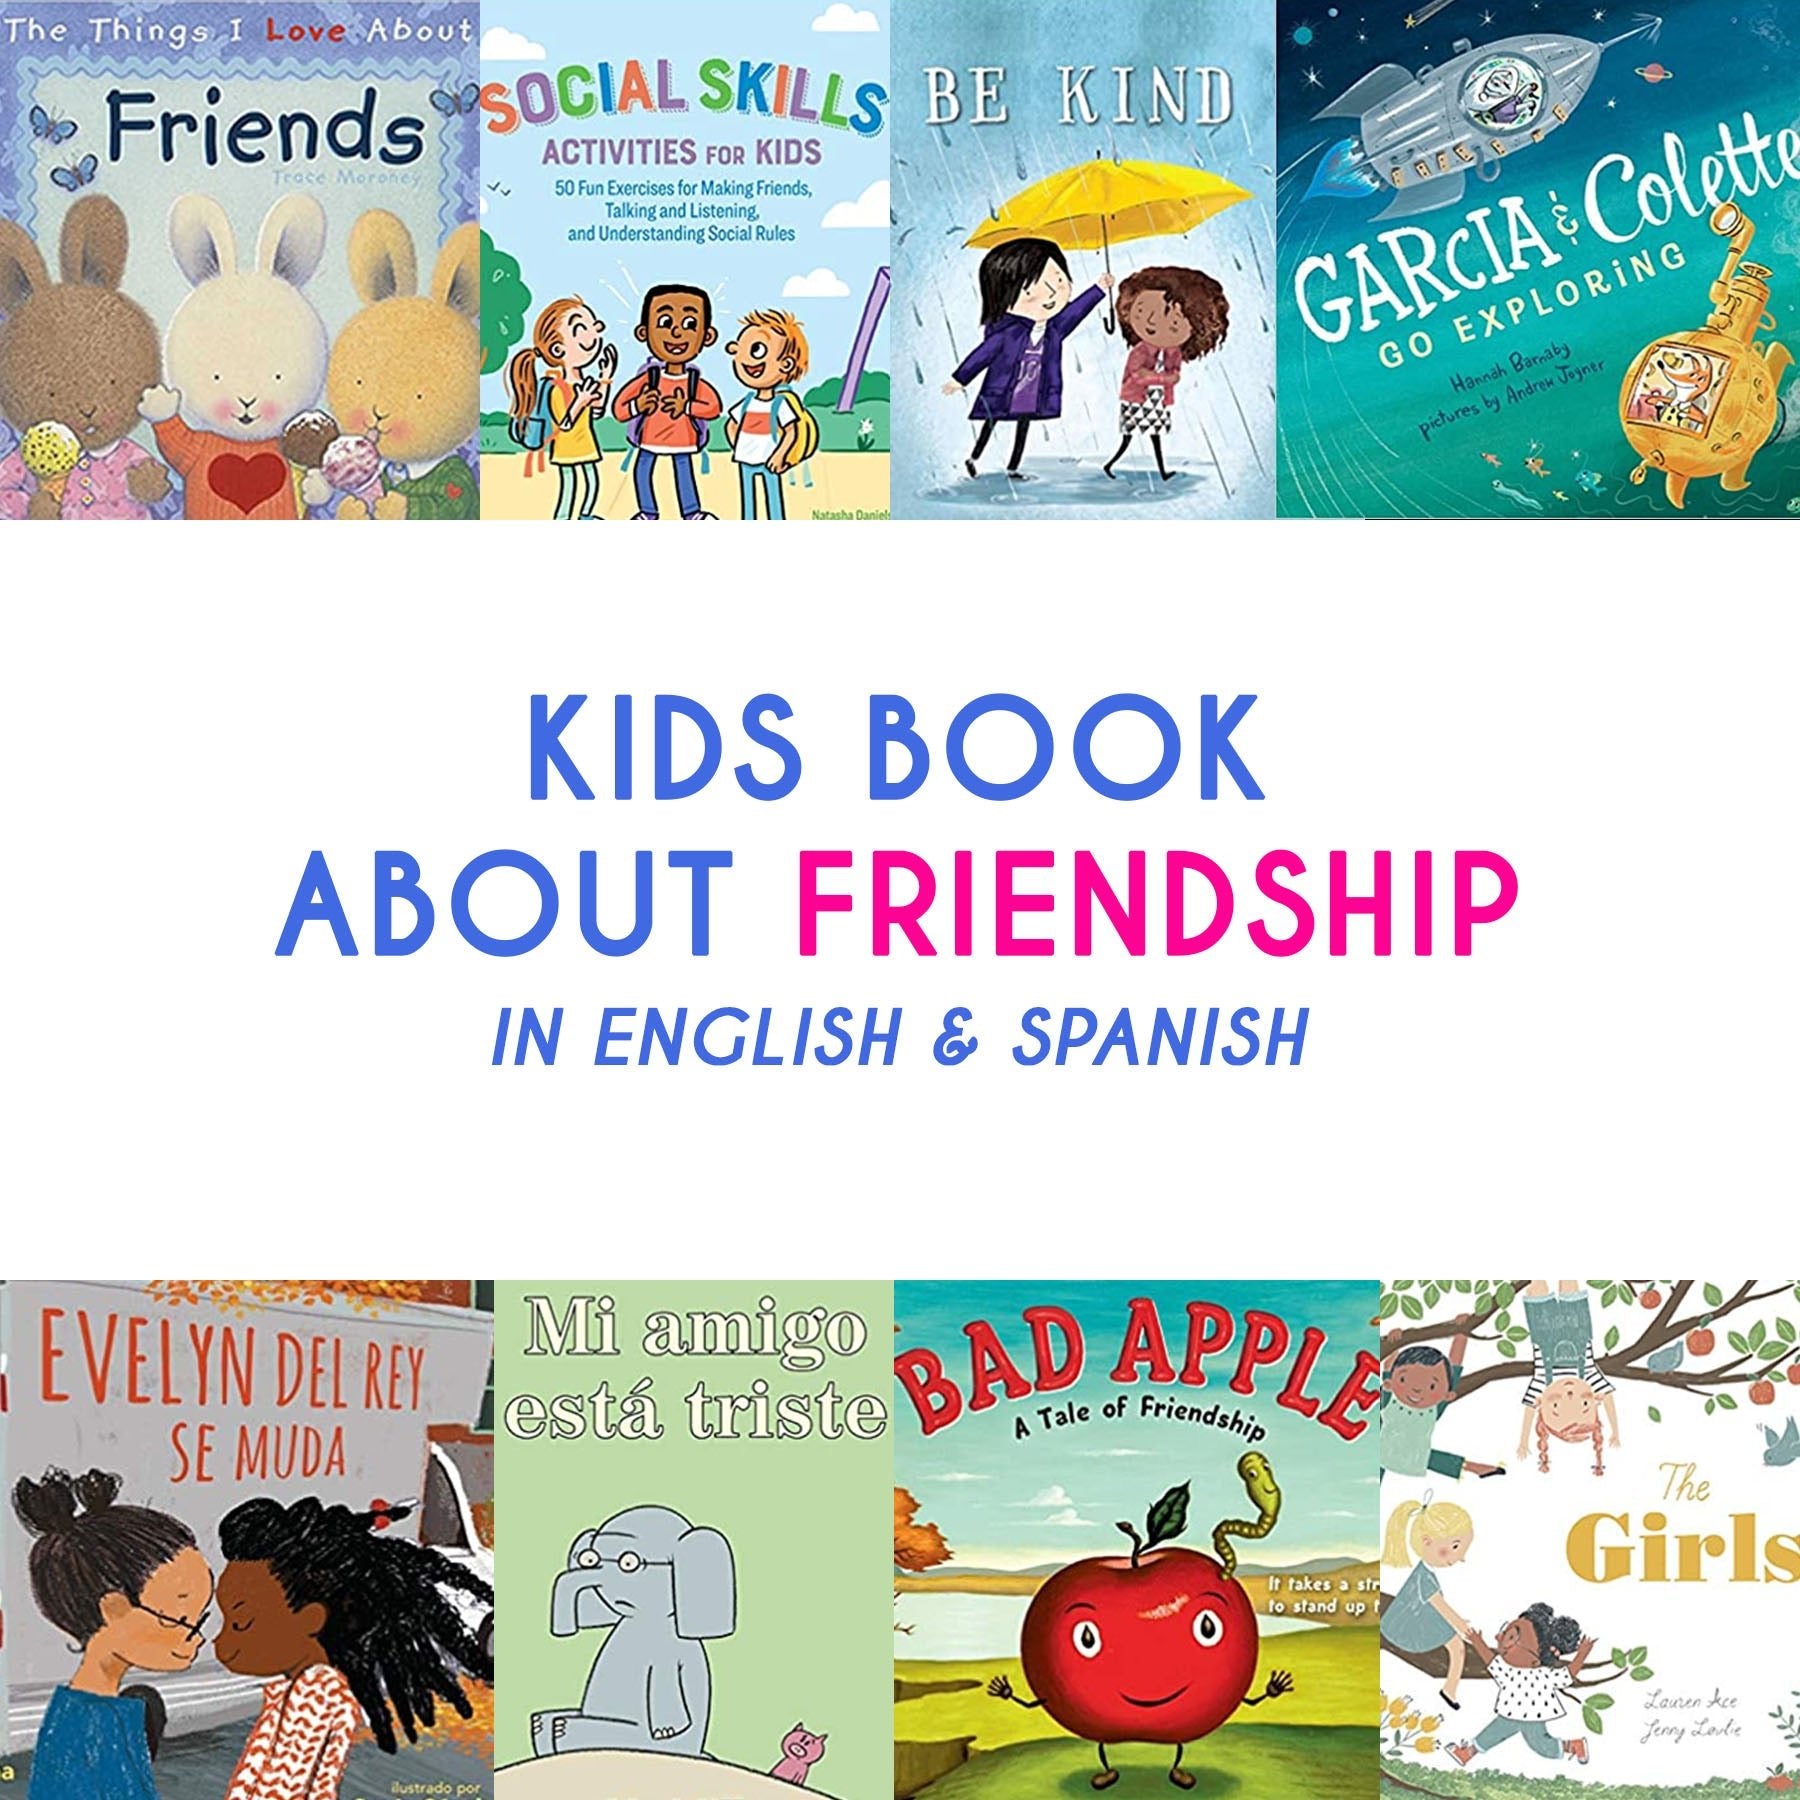 Kids Books About Friendship in Spanish and English - Mi LegaSi